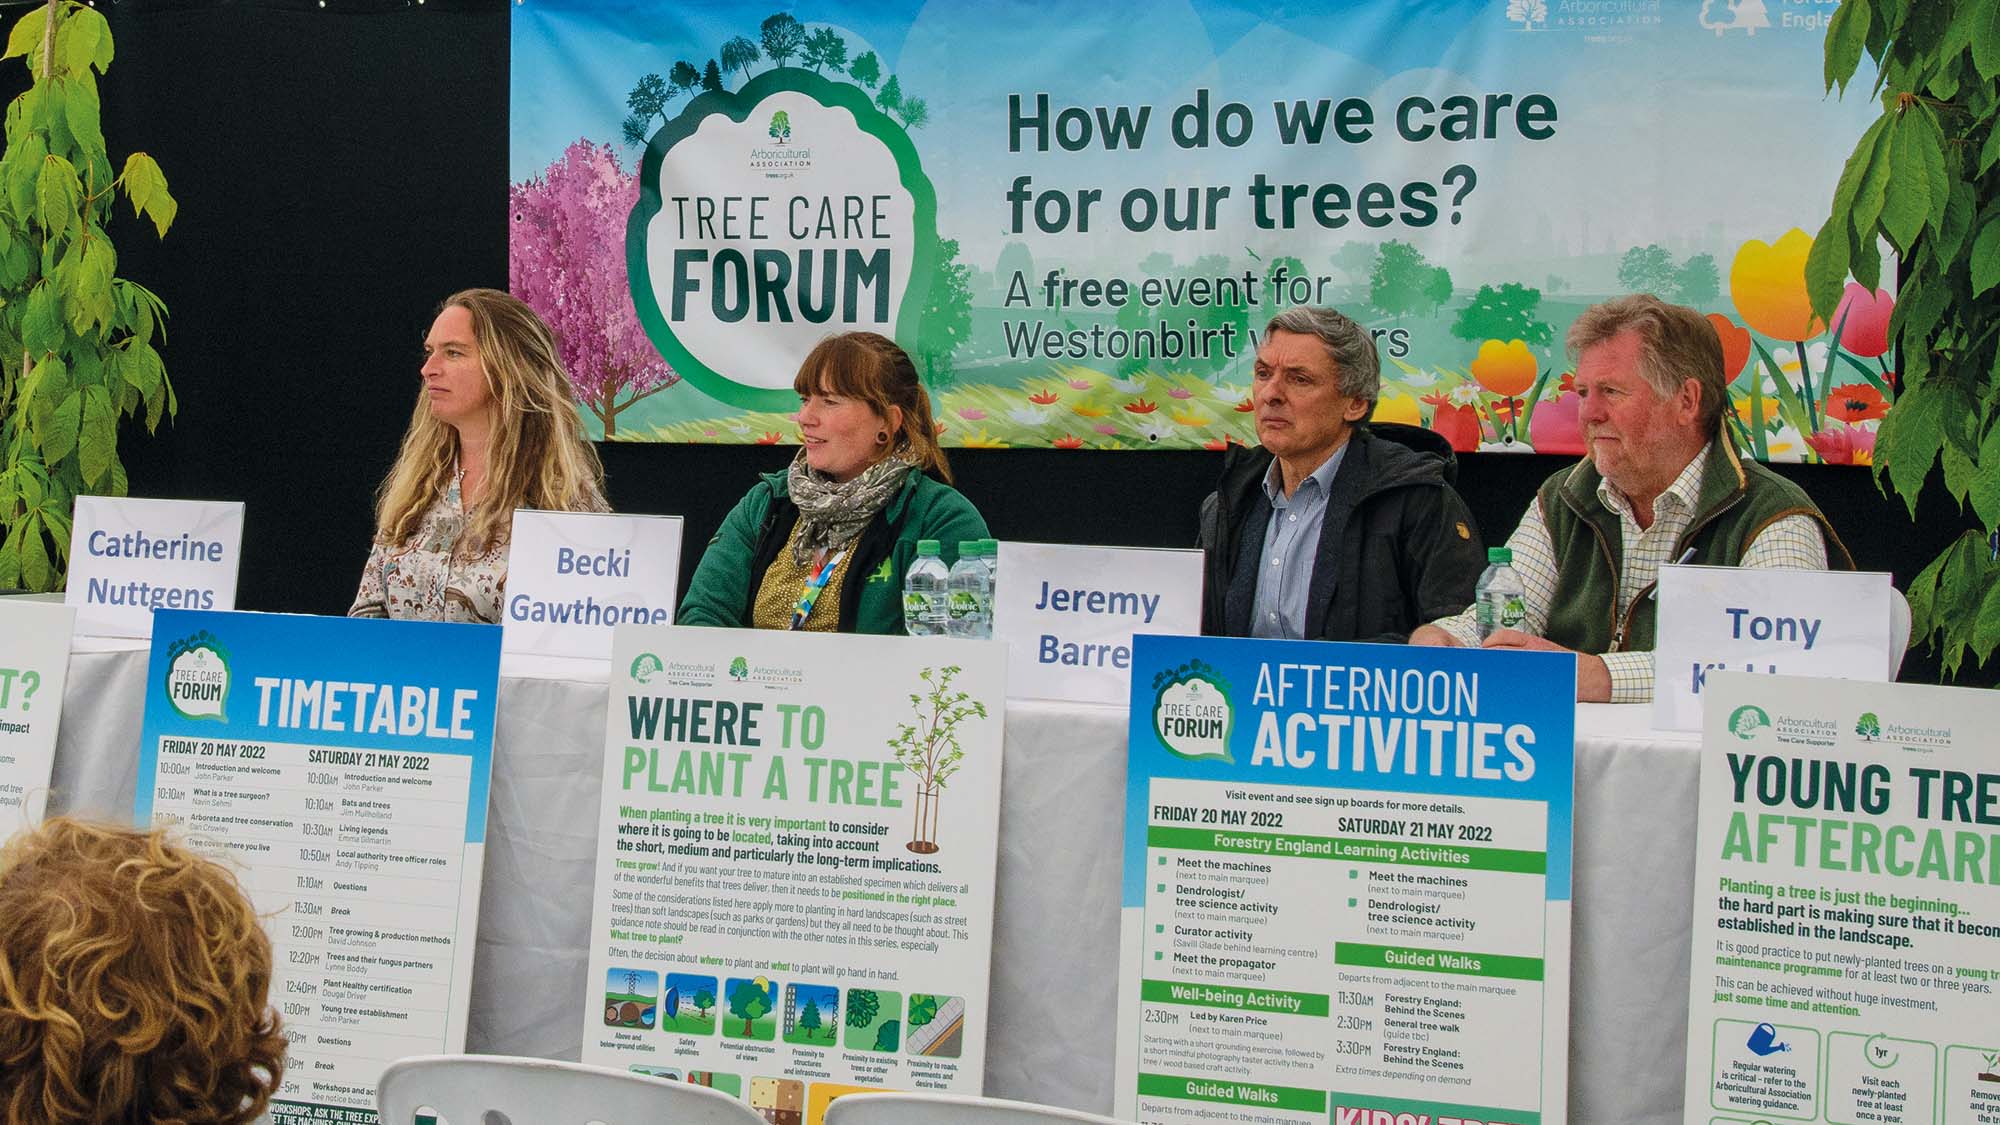 Panel questions taken at the Tree Care Forum 2022 at Westonbirt Arboretum